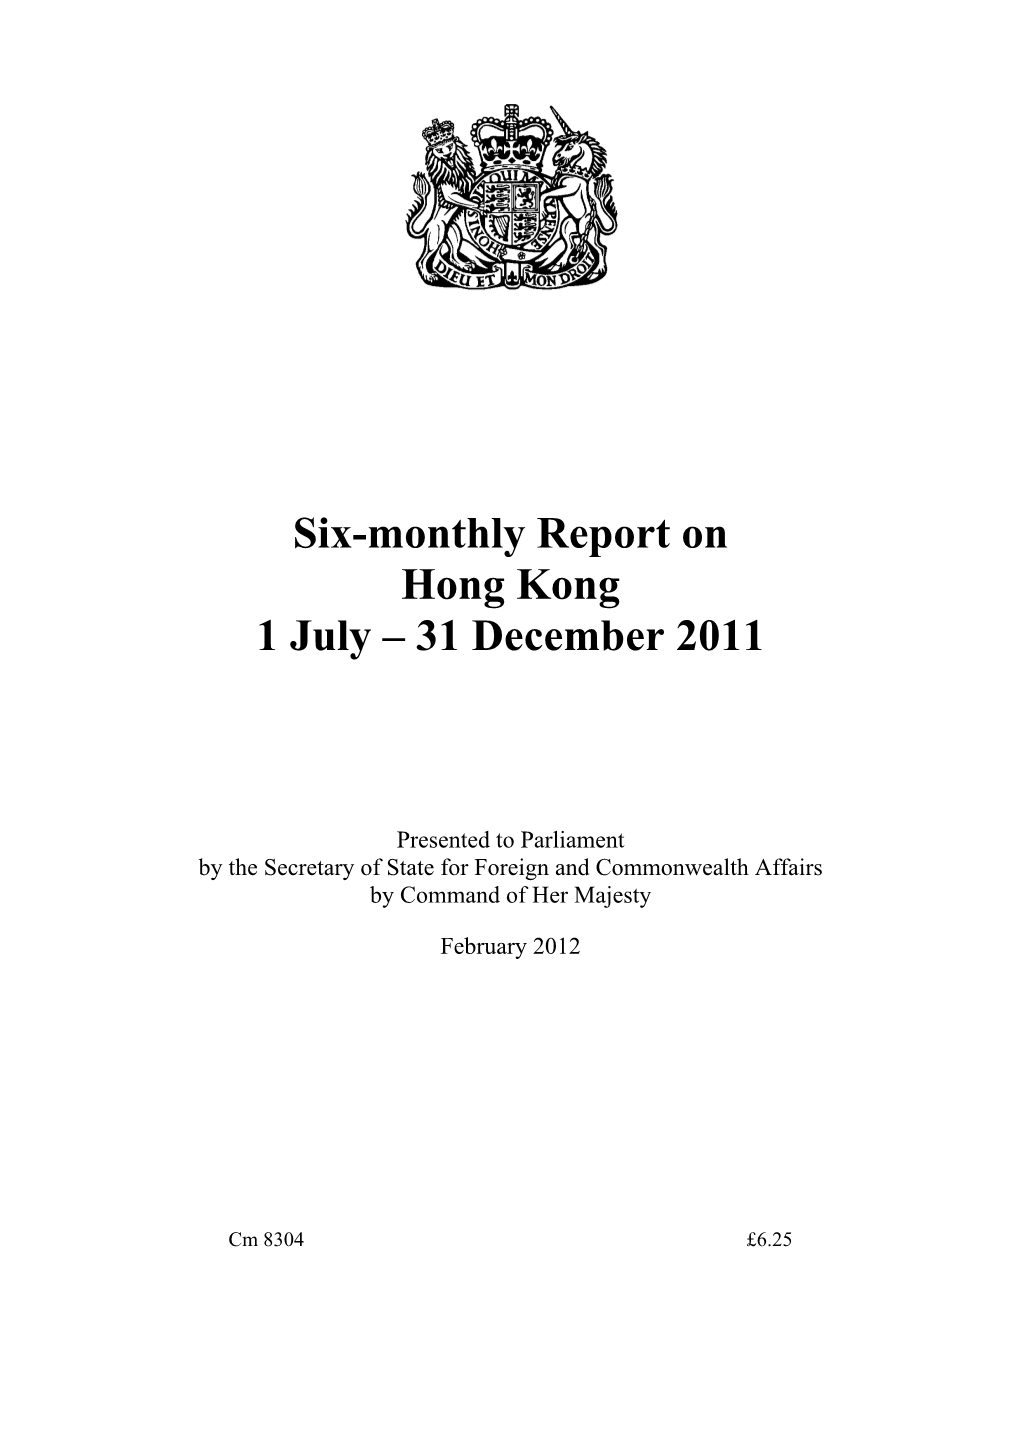 Six-Monthly Report on Hong Kong 1 July – 31 December 2011